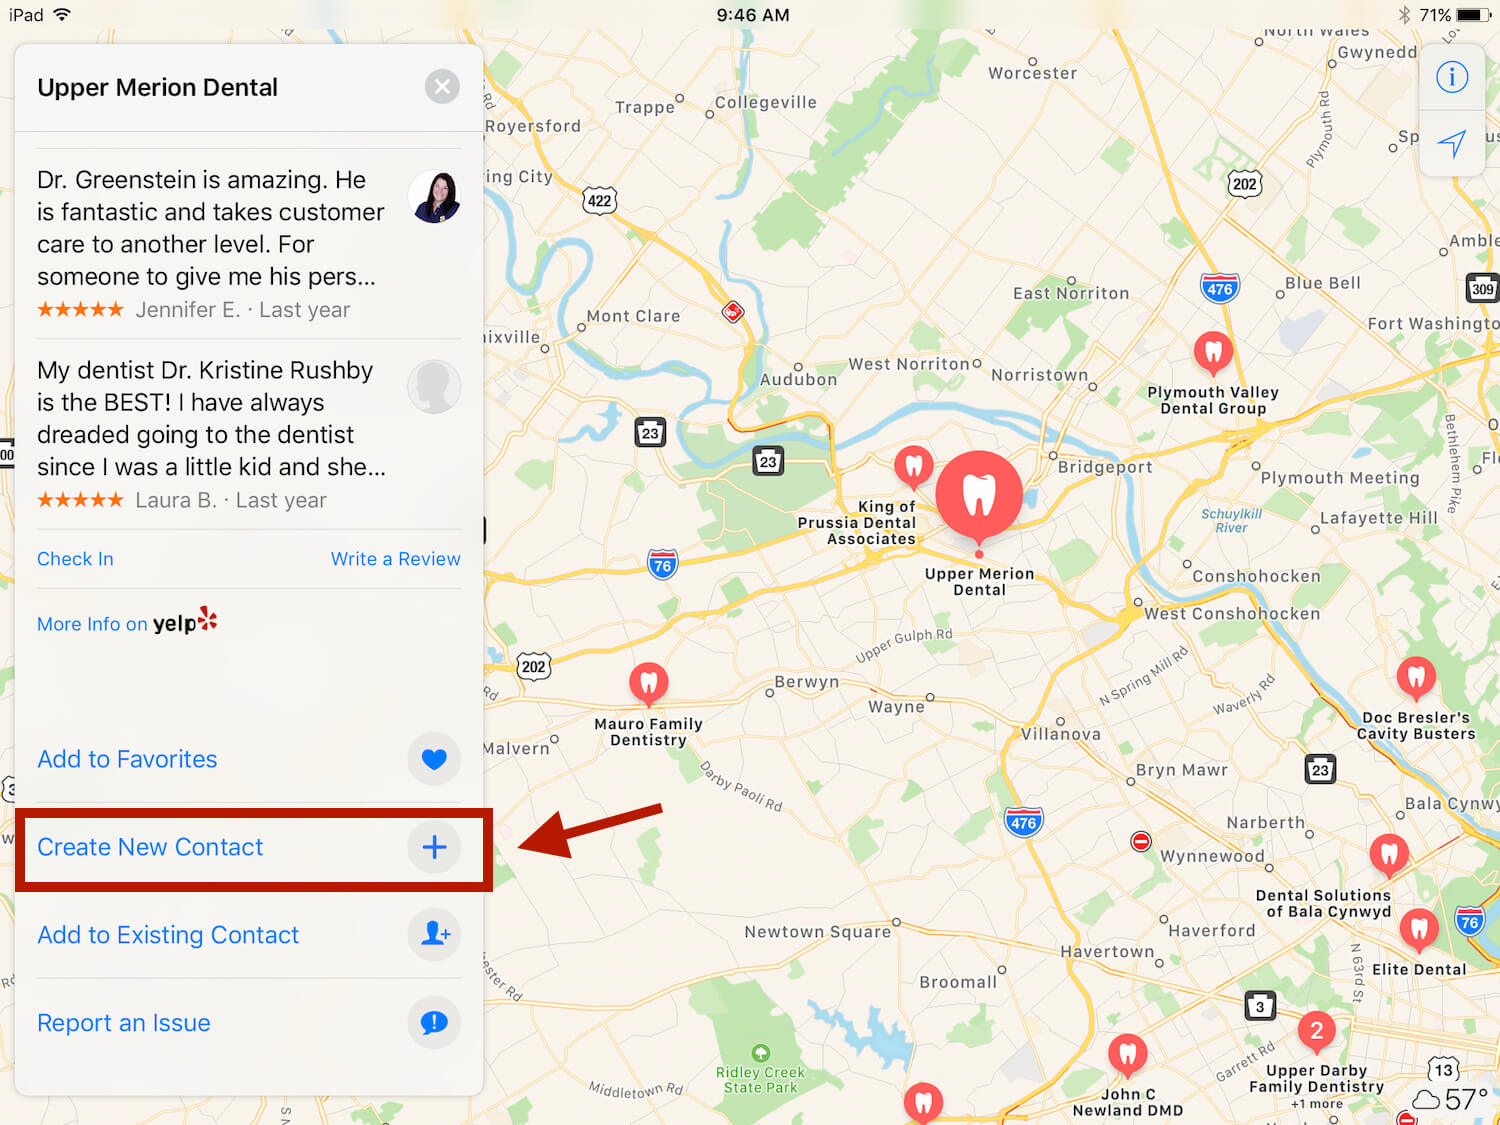 Creating a new contact in Apple Maps